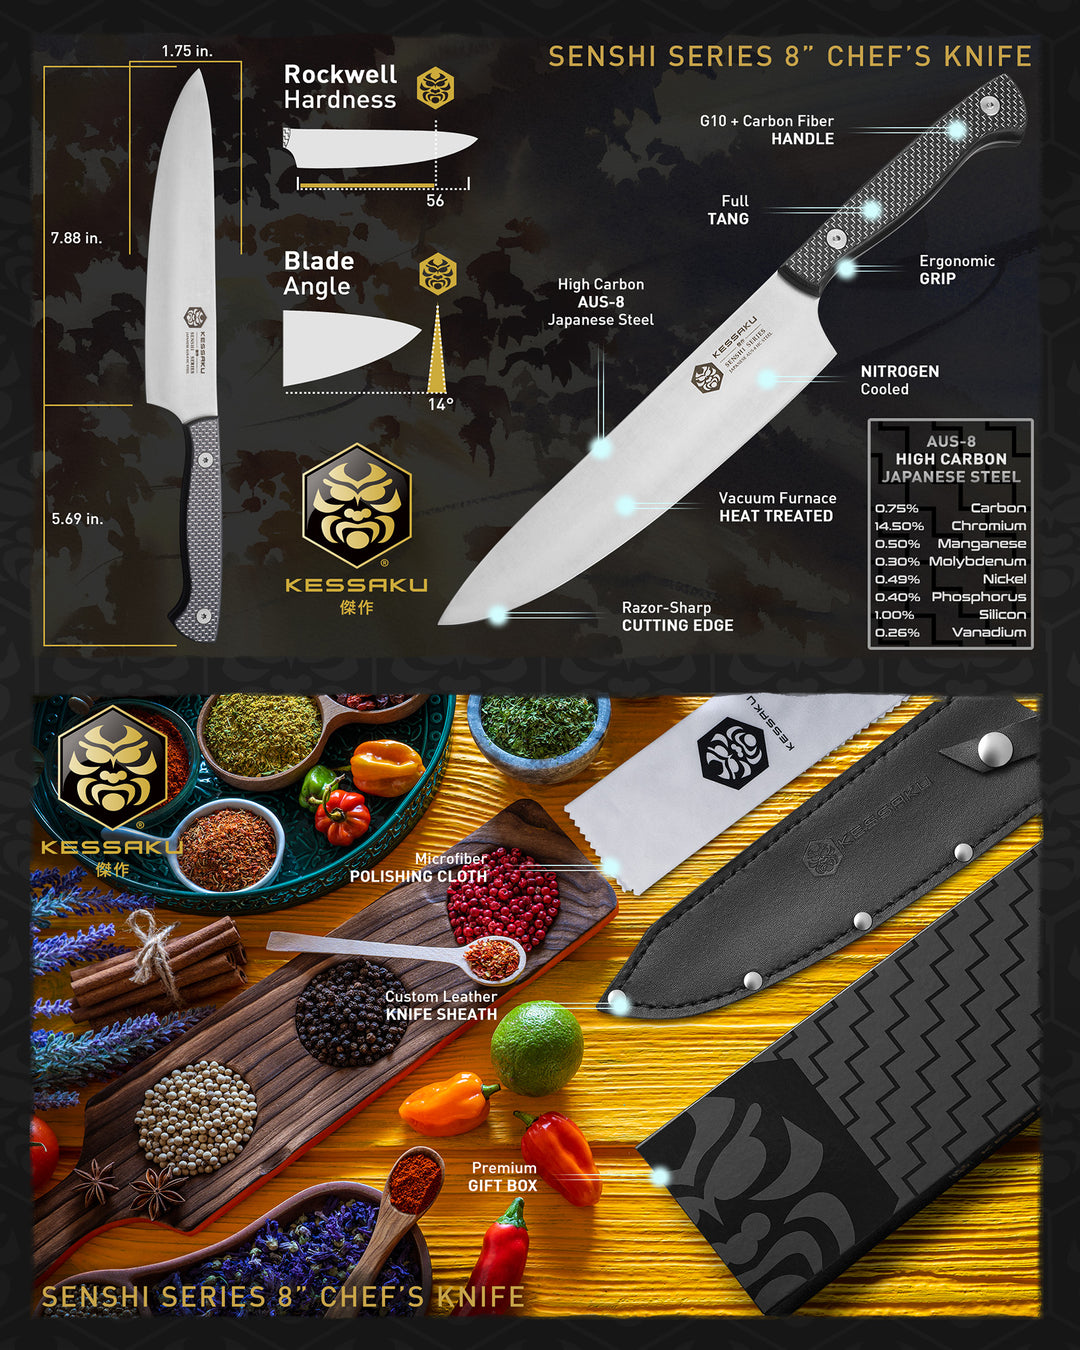 Knife Features, Specifications, and Included Items for the Senshi Two Knife Set with Paring and Chef's Knife